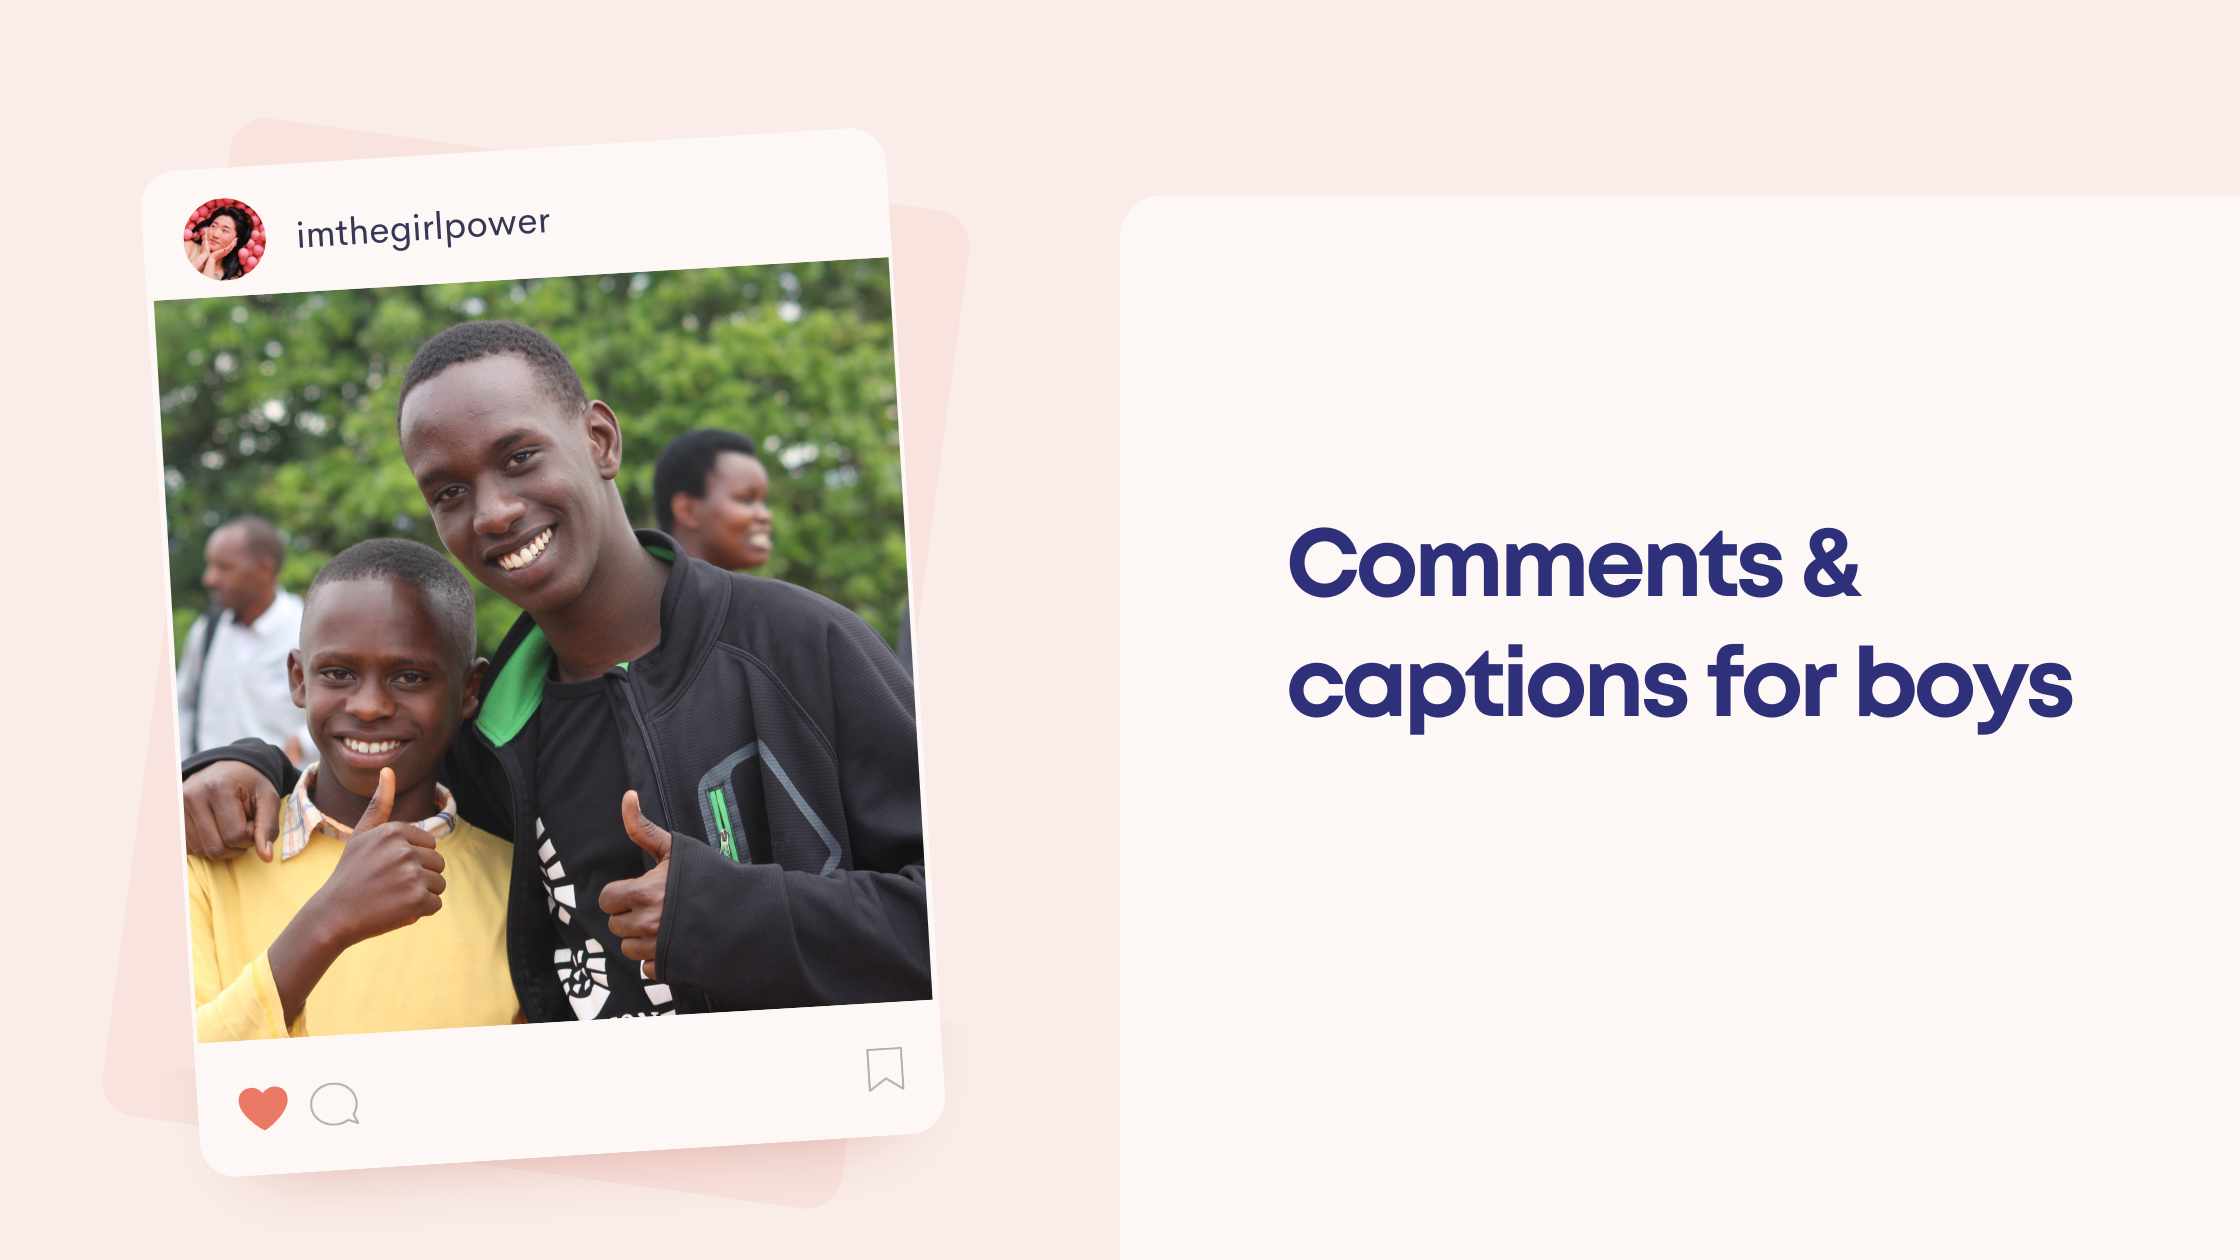 Remote.tools shares the list of comments & captions for posts on Instagram for boys